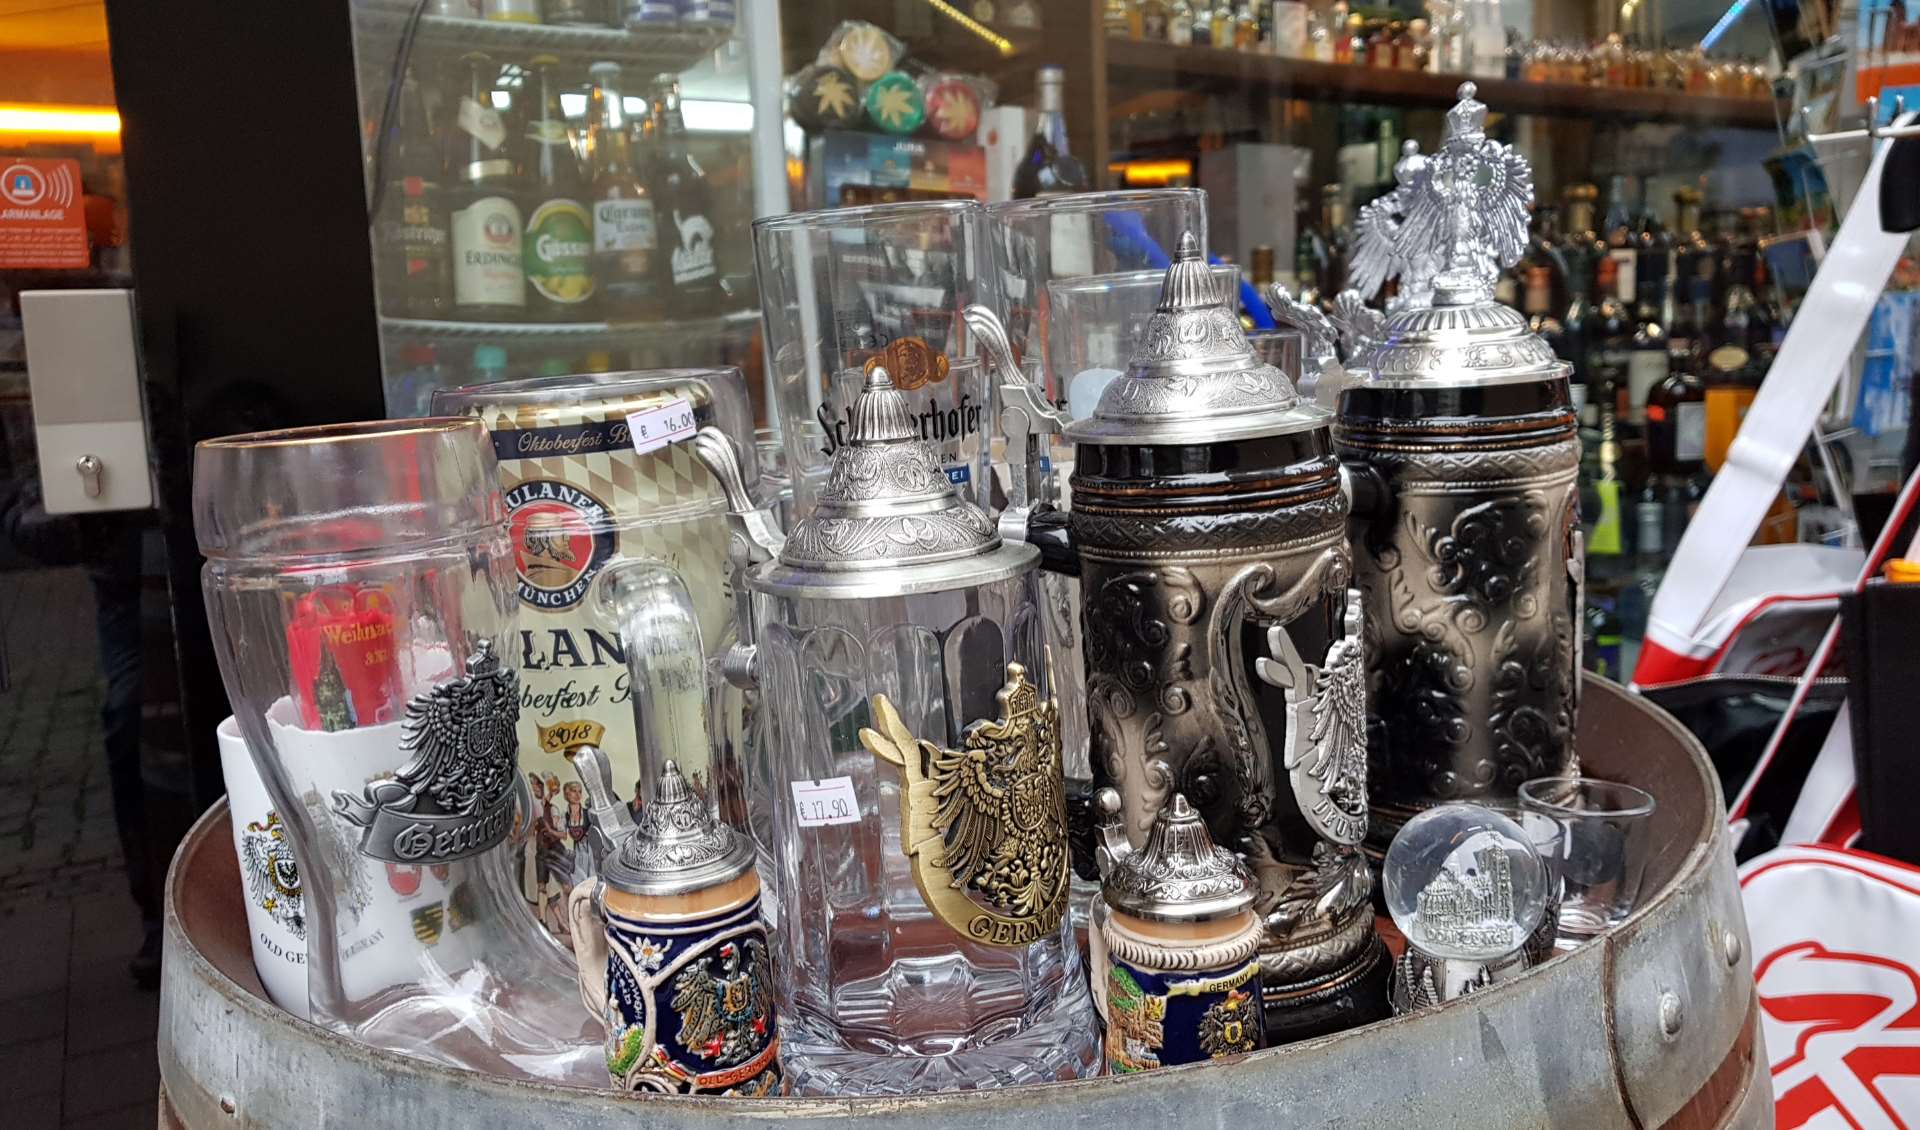 What to Buy in Cologne: 18 Ideas of Souvenirs and Gifts